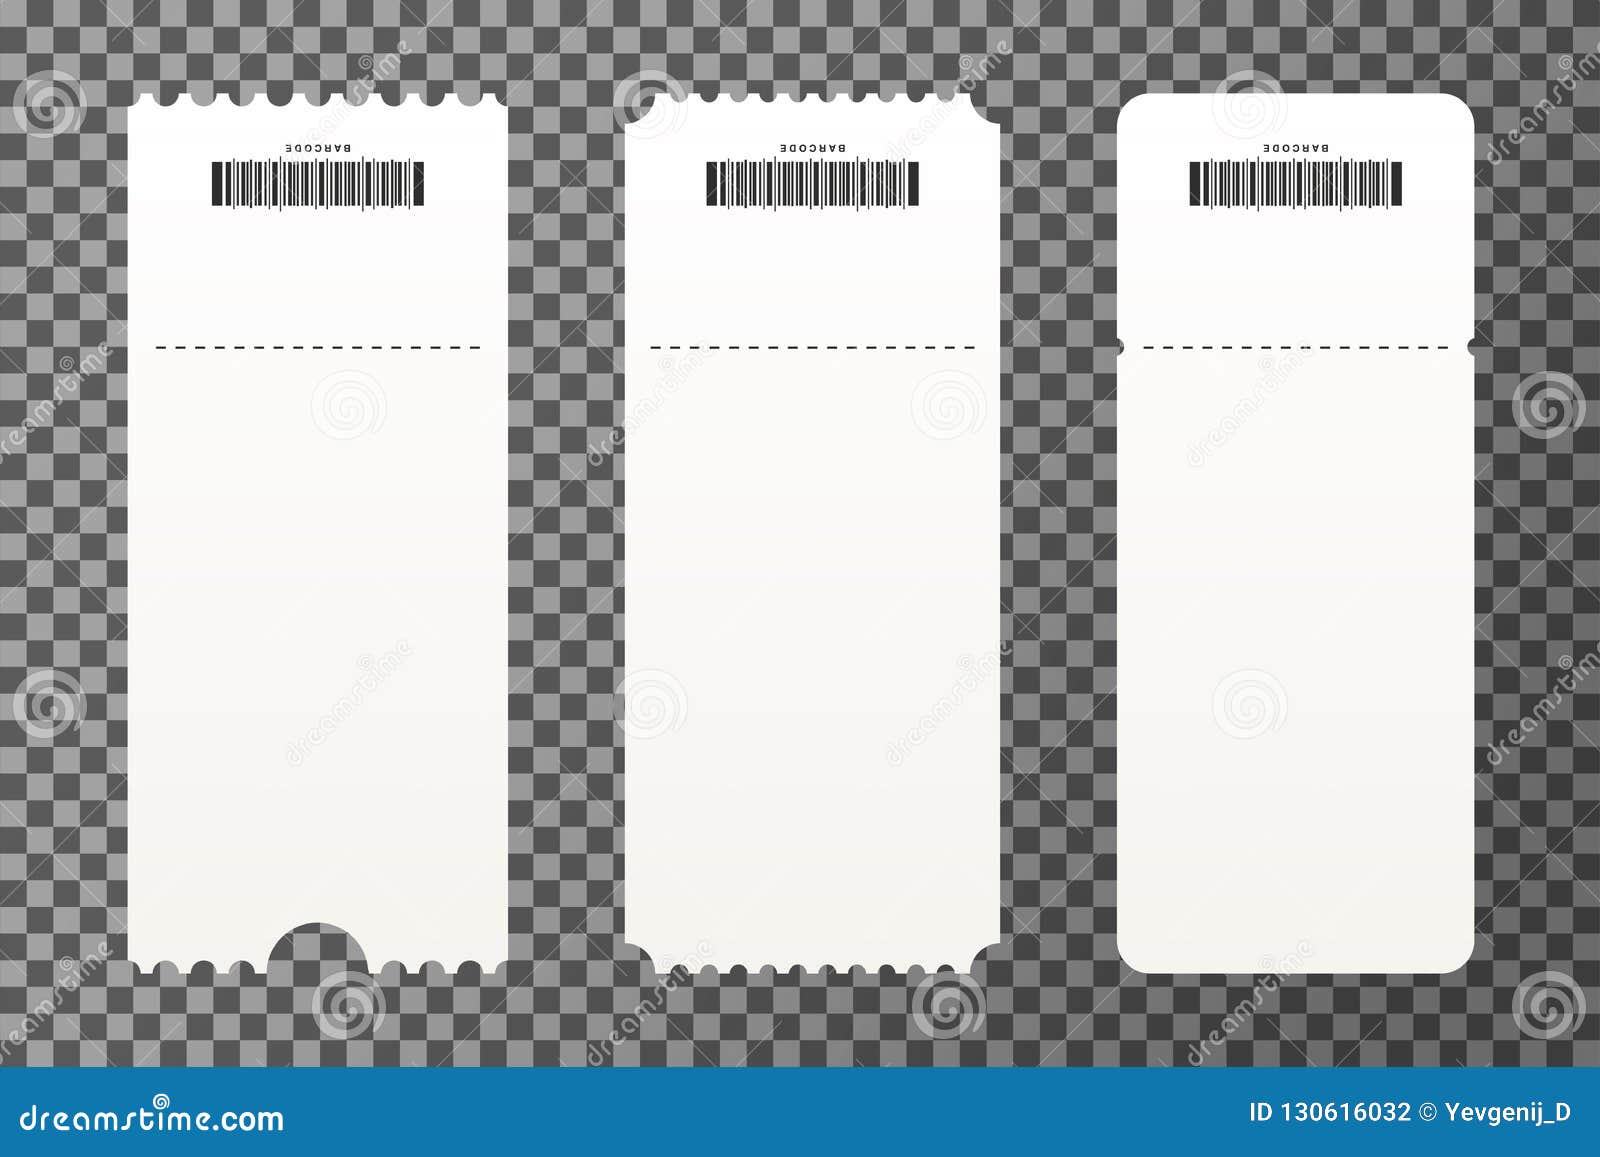 Set of Empty Ticket Templates Isolated on Transparent Background In Blank Admission Ticket Template